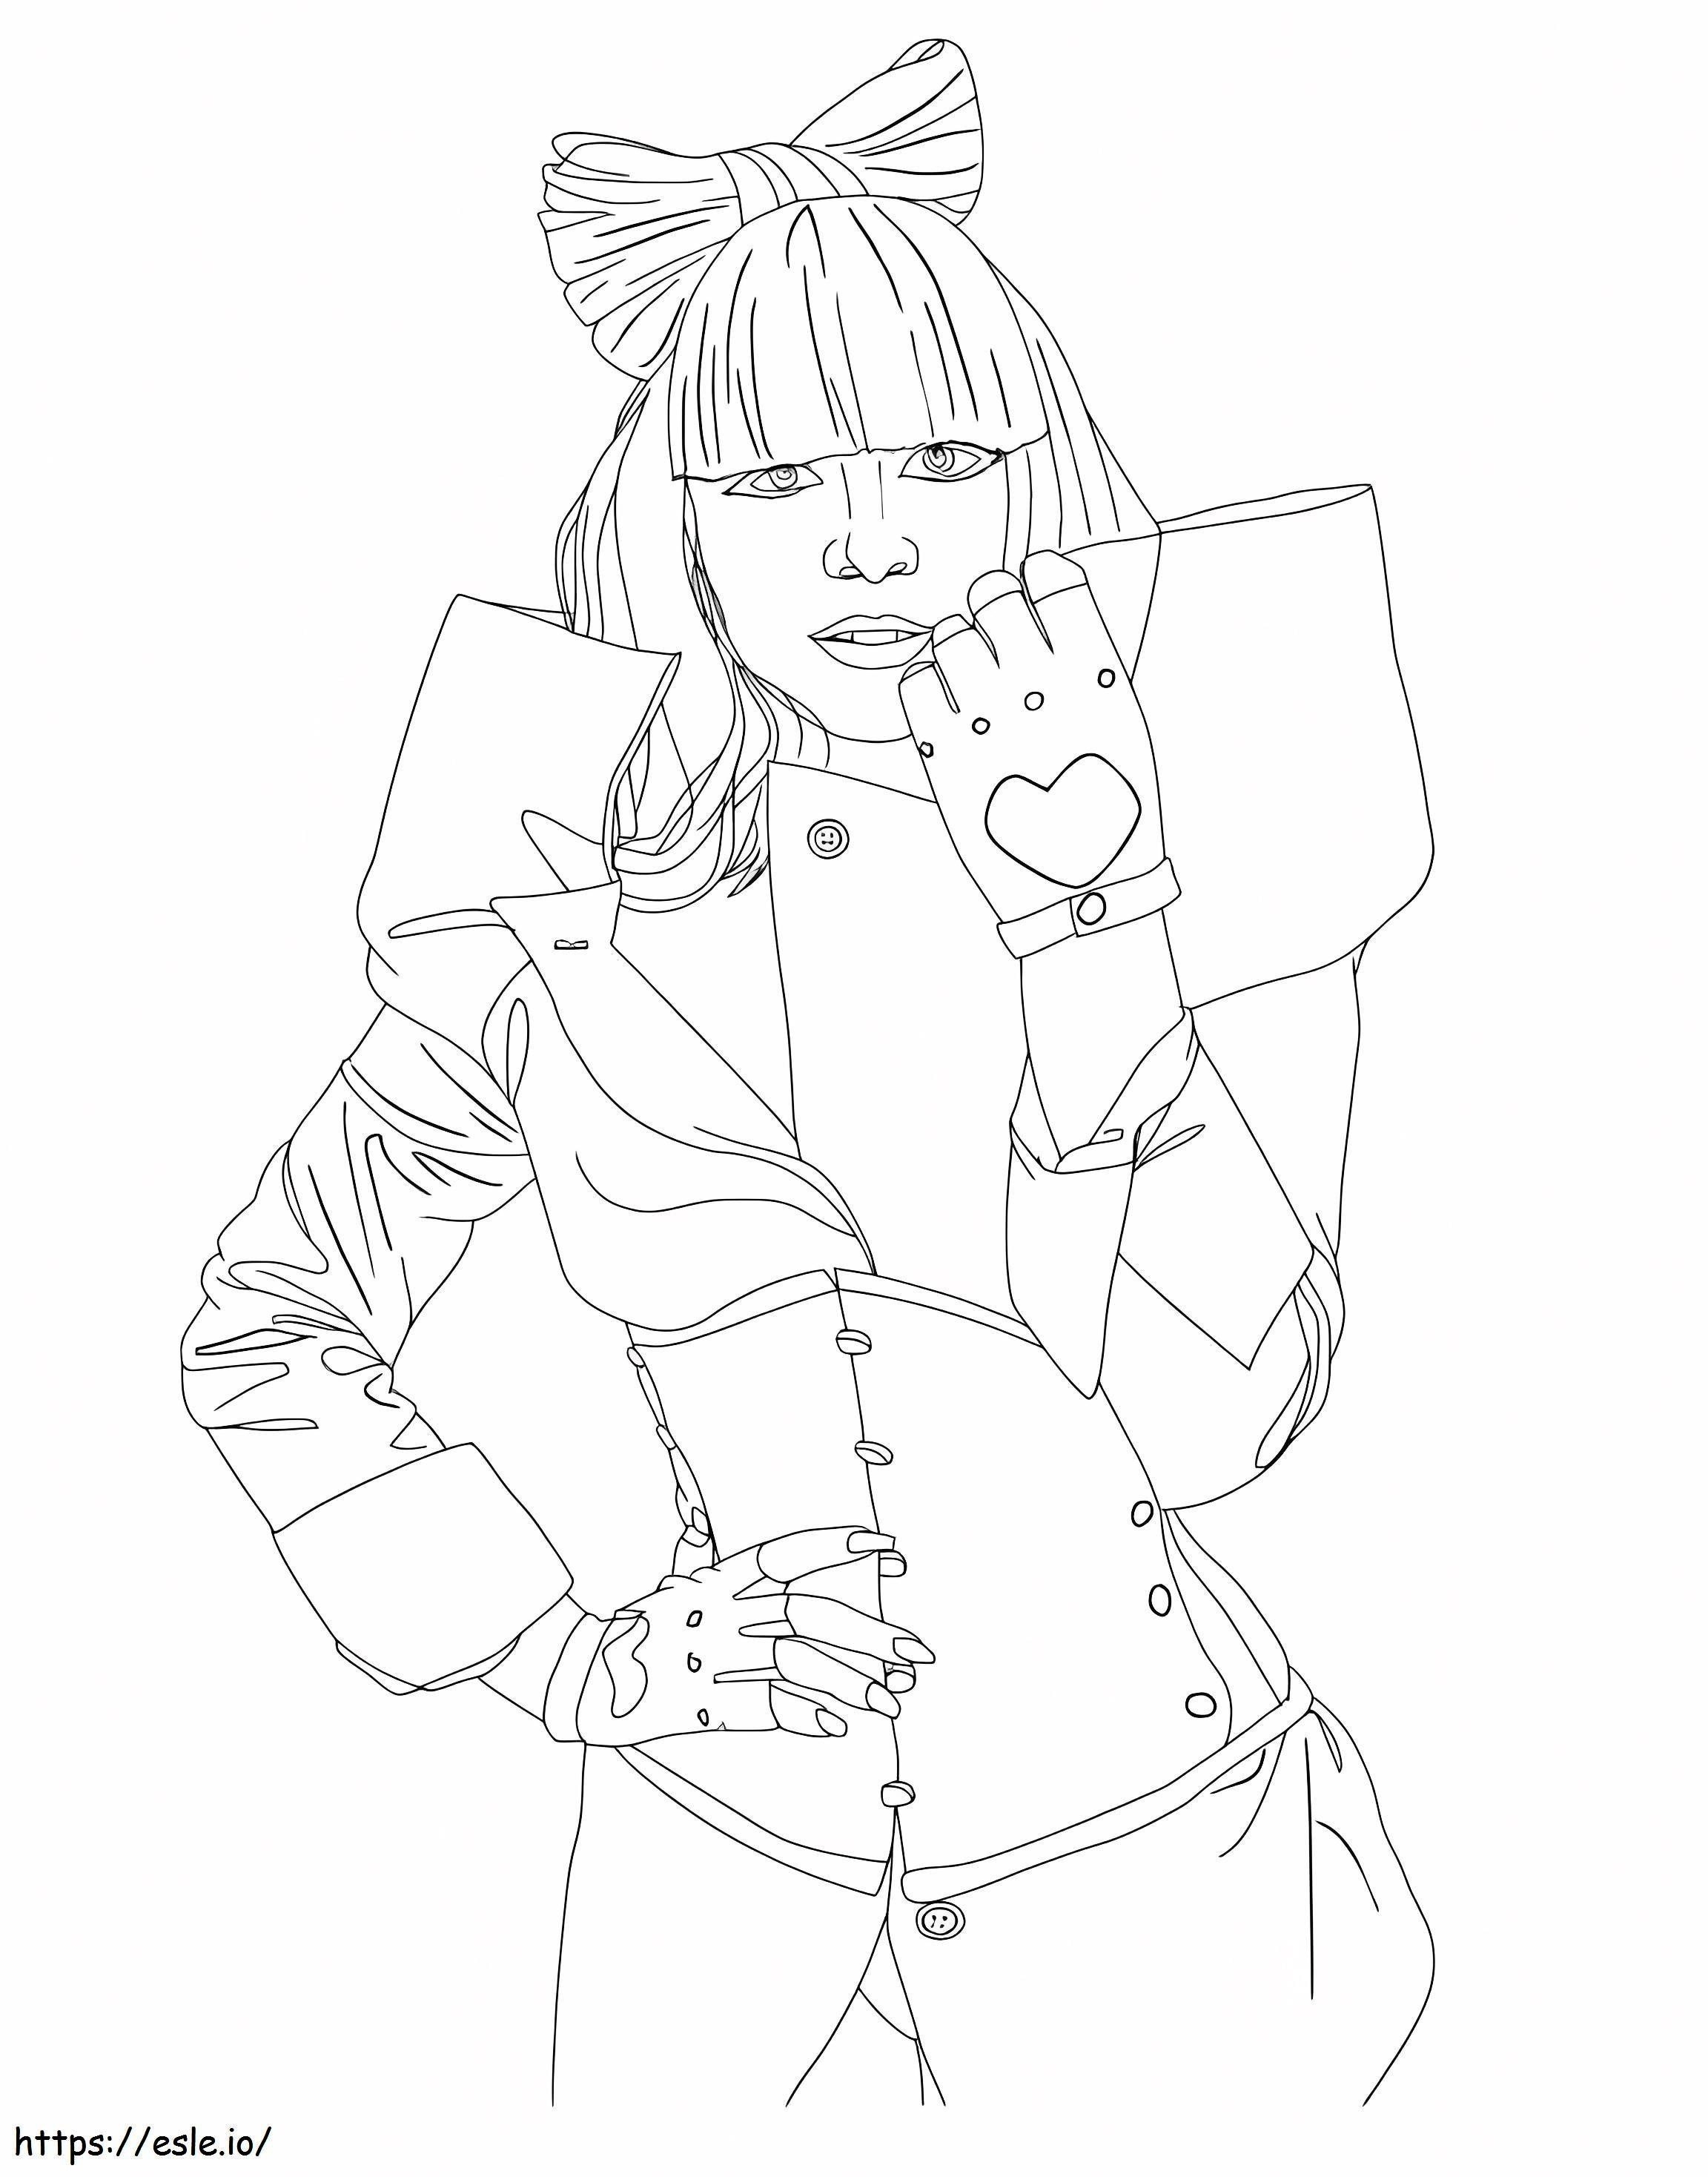 Lady Gaga With Gloves coloring page